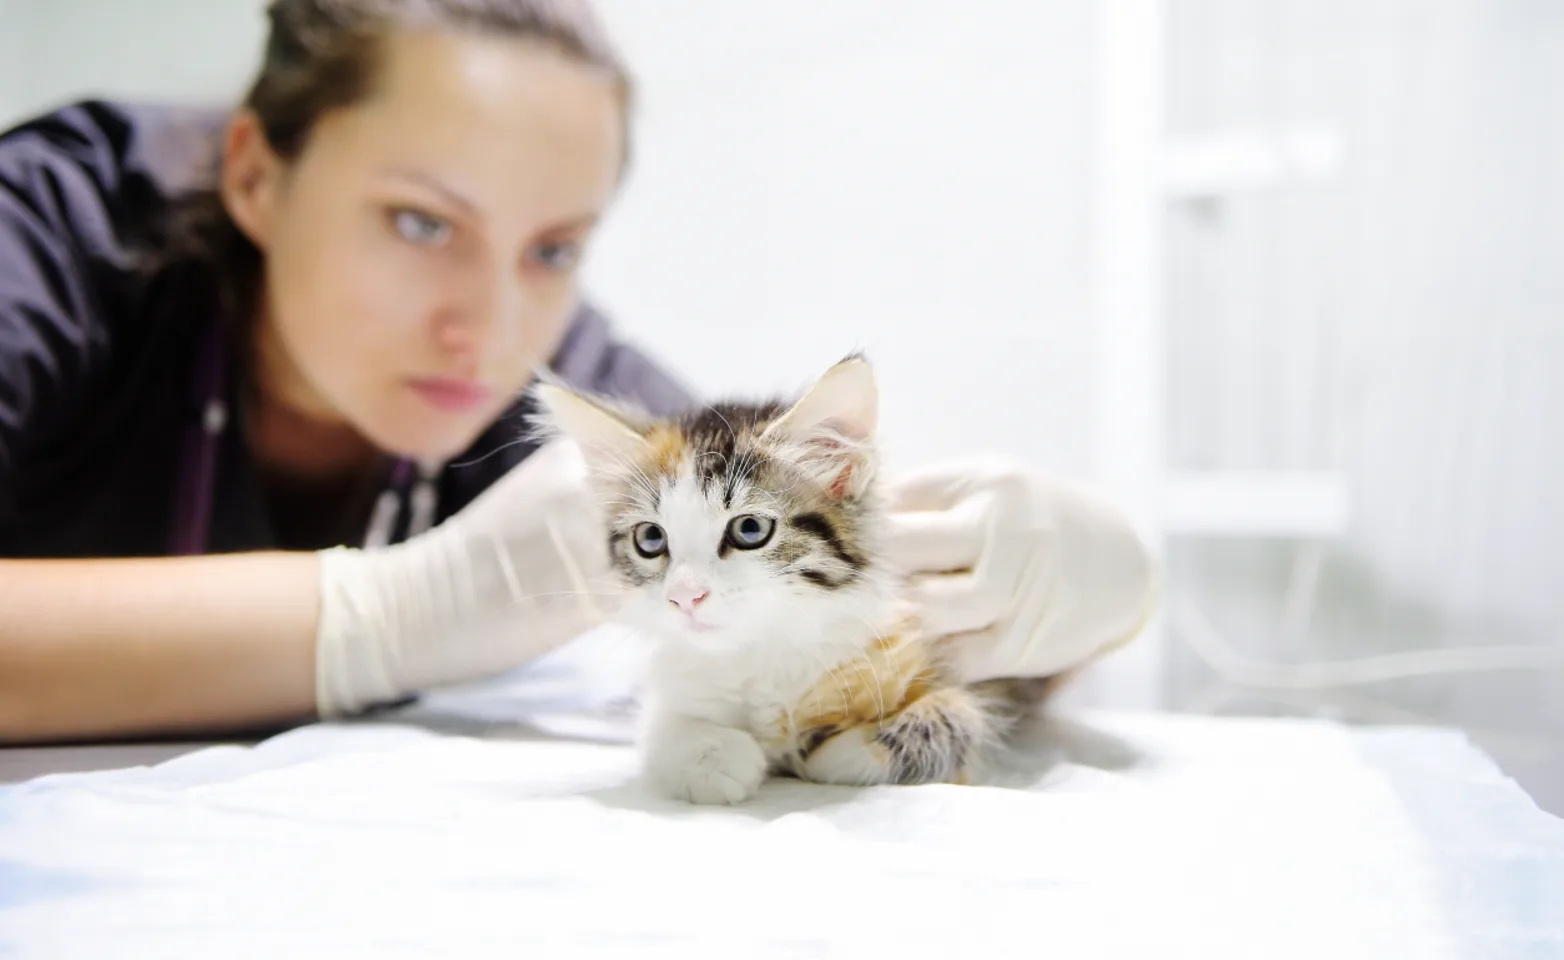 Cat being examined by doctor